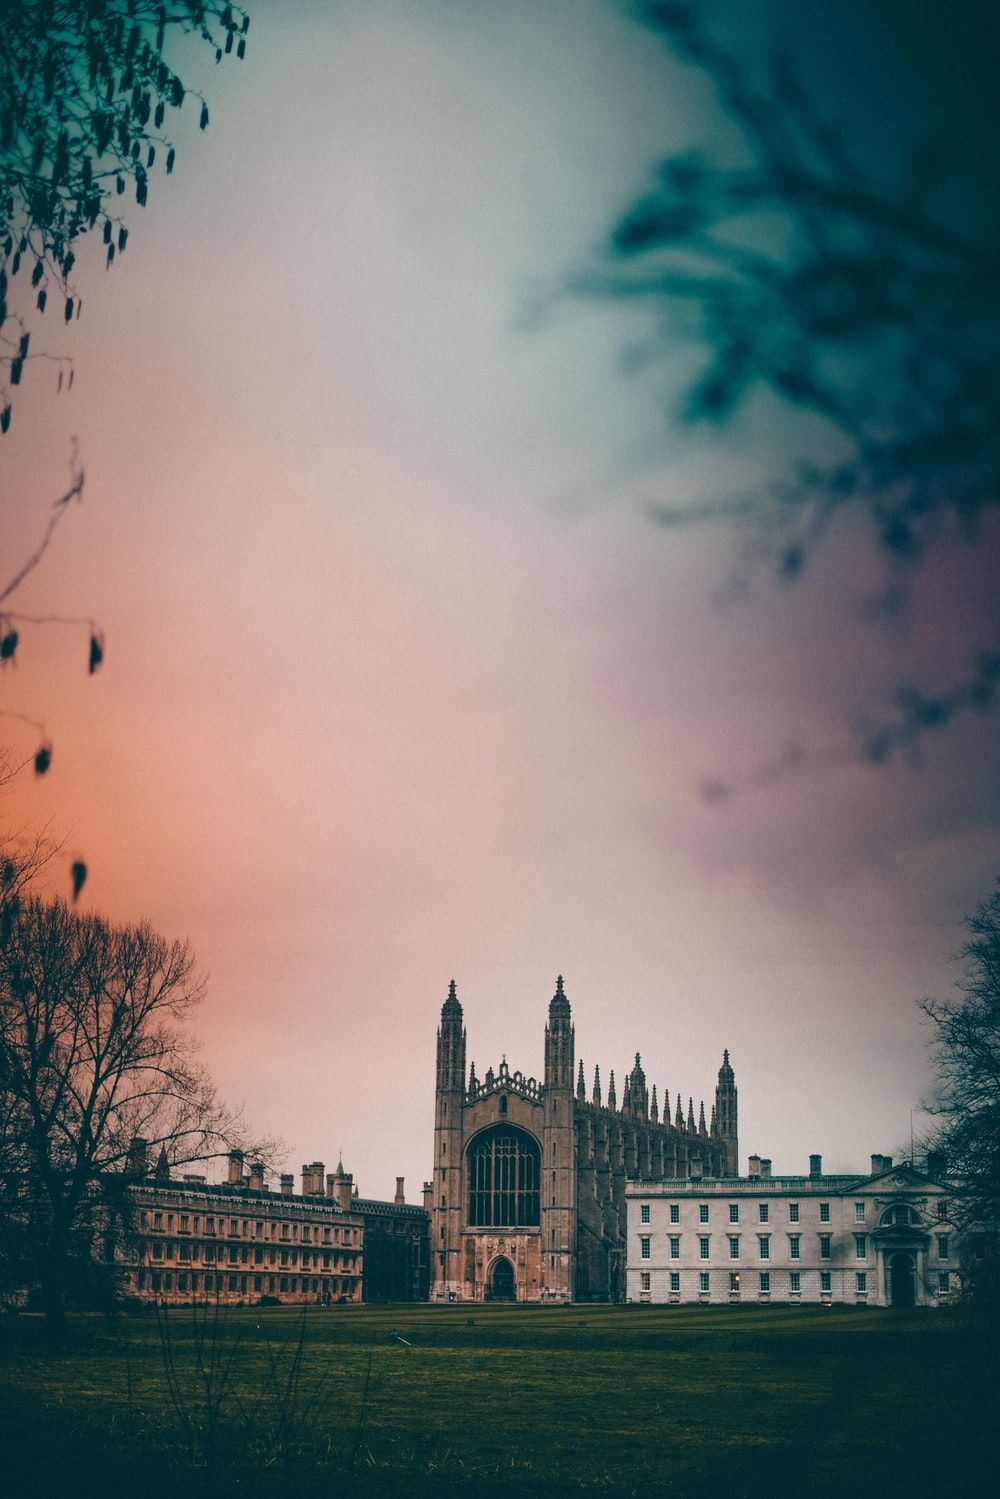 University Of Cambridge Picture. Download Free Image